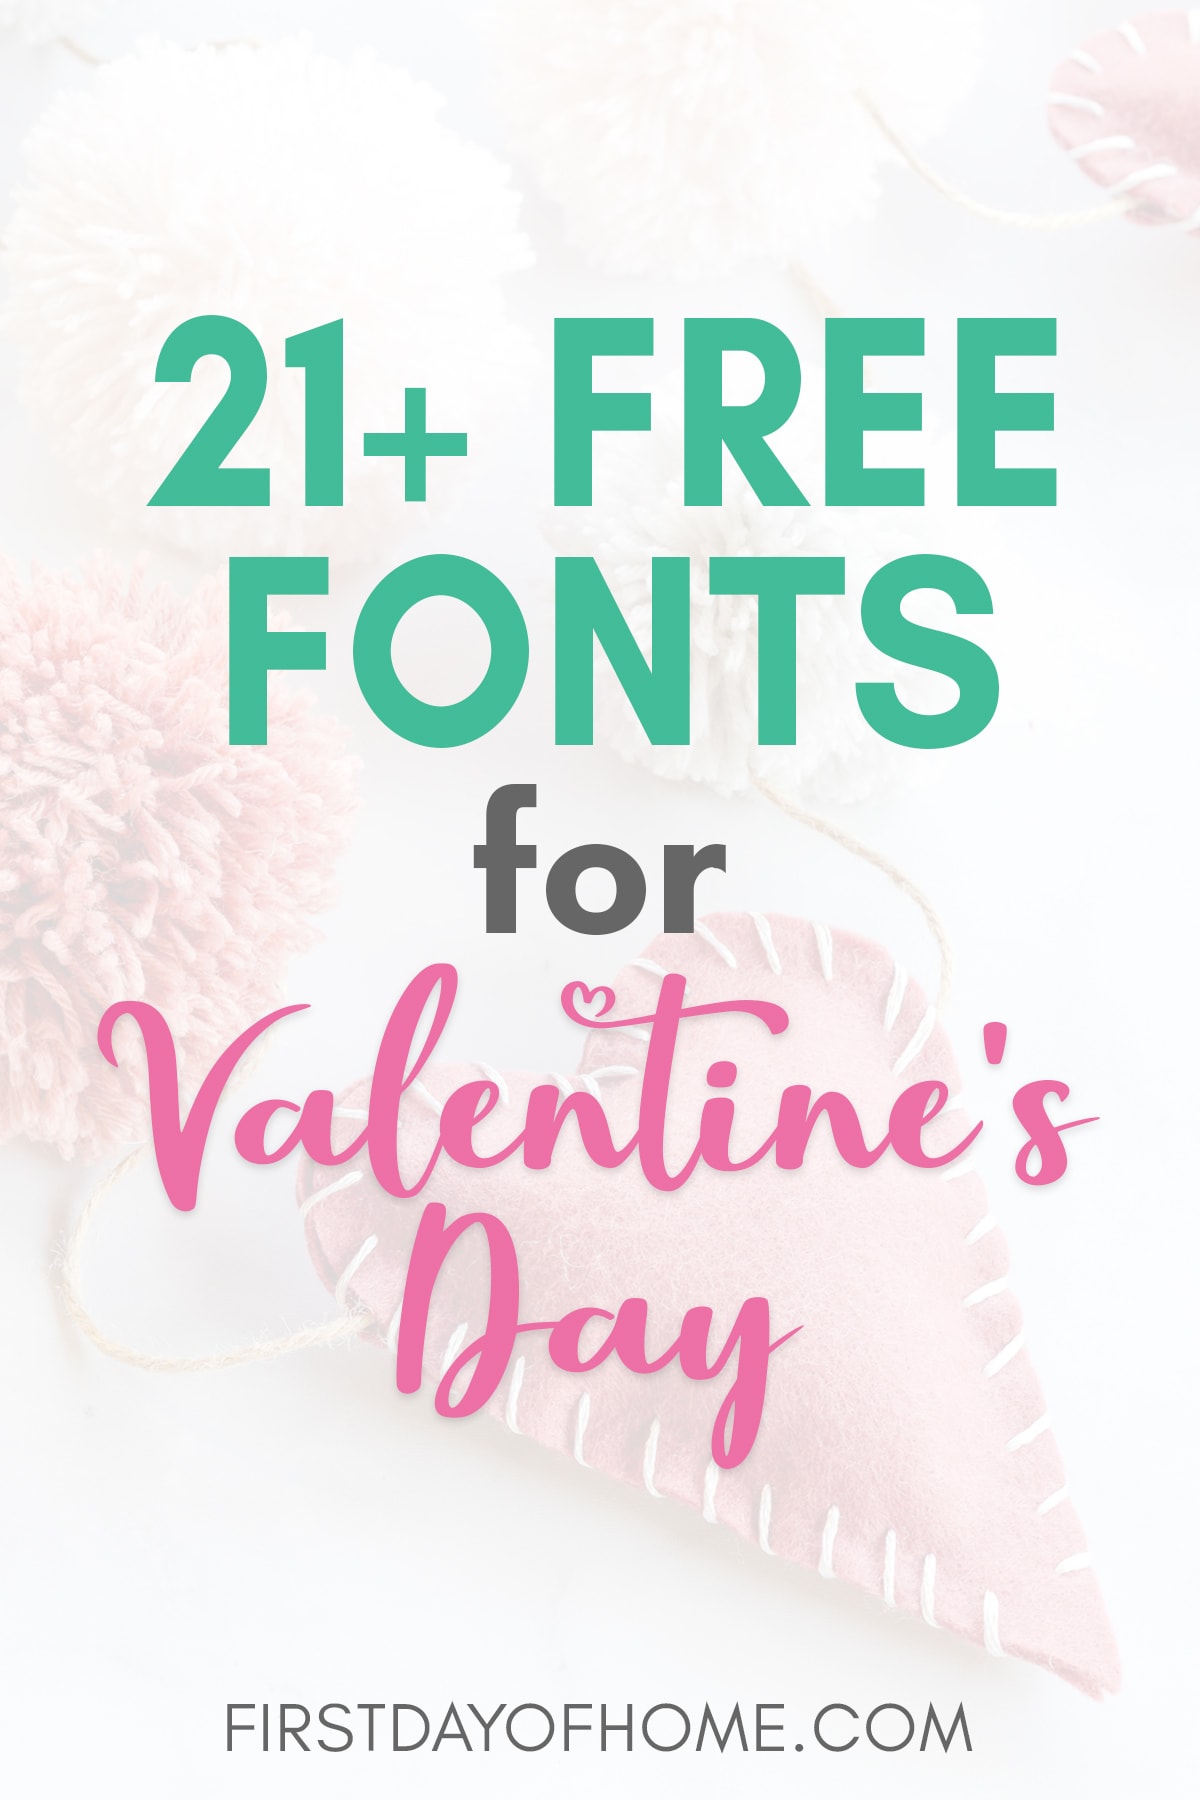 Image of felt heart garland in the background with text overlay reading "21+ Free Fonts for Valentine's Day".